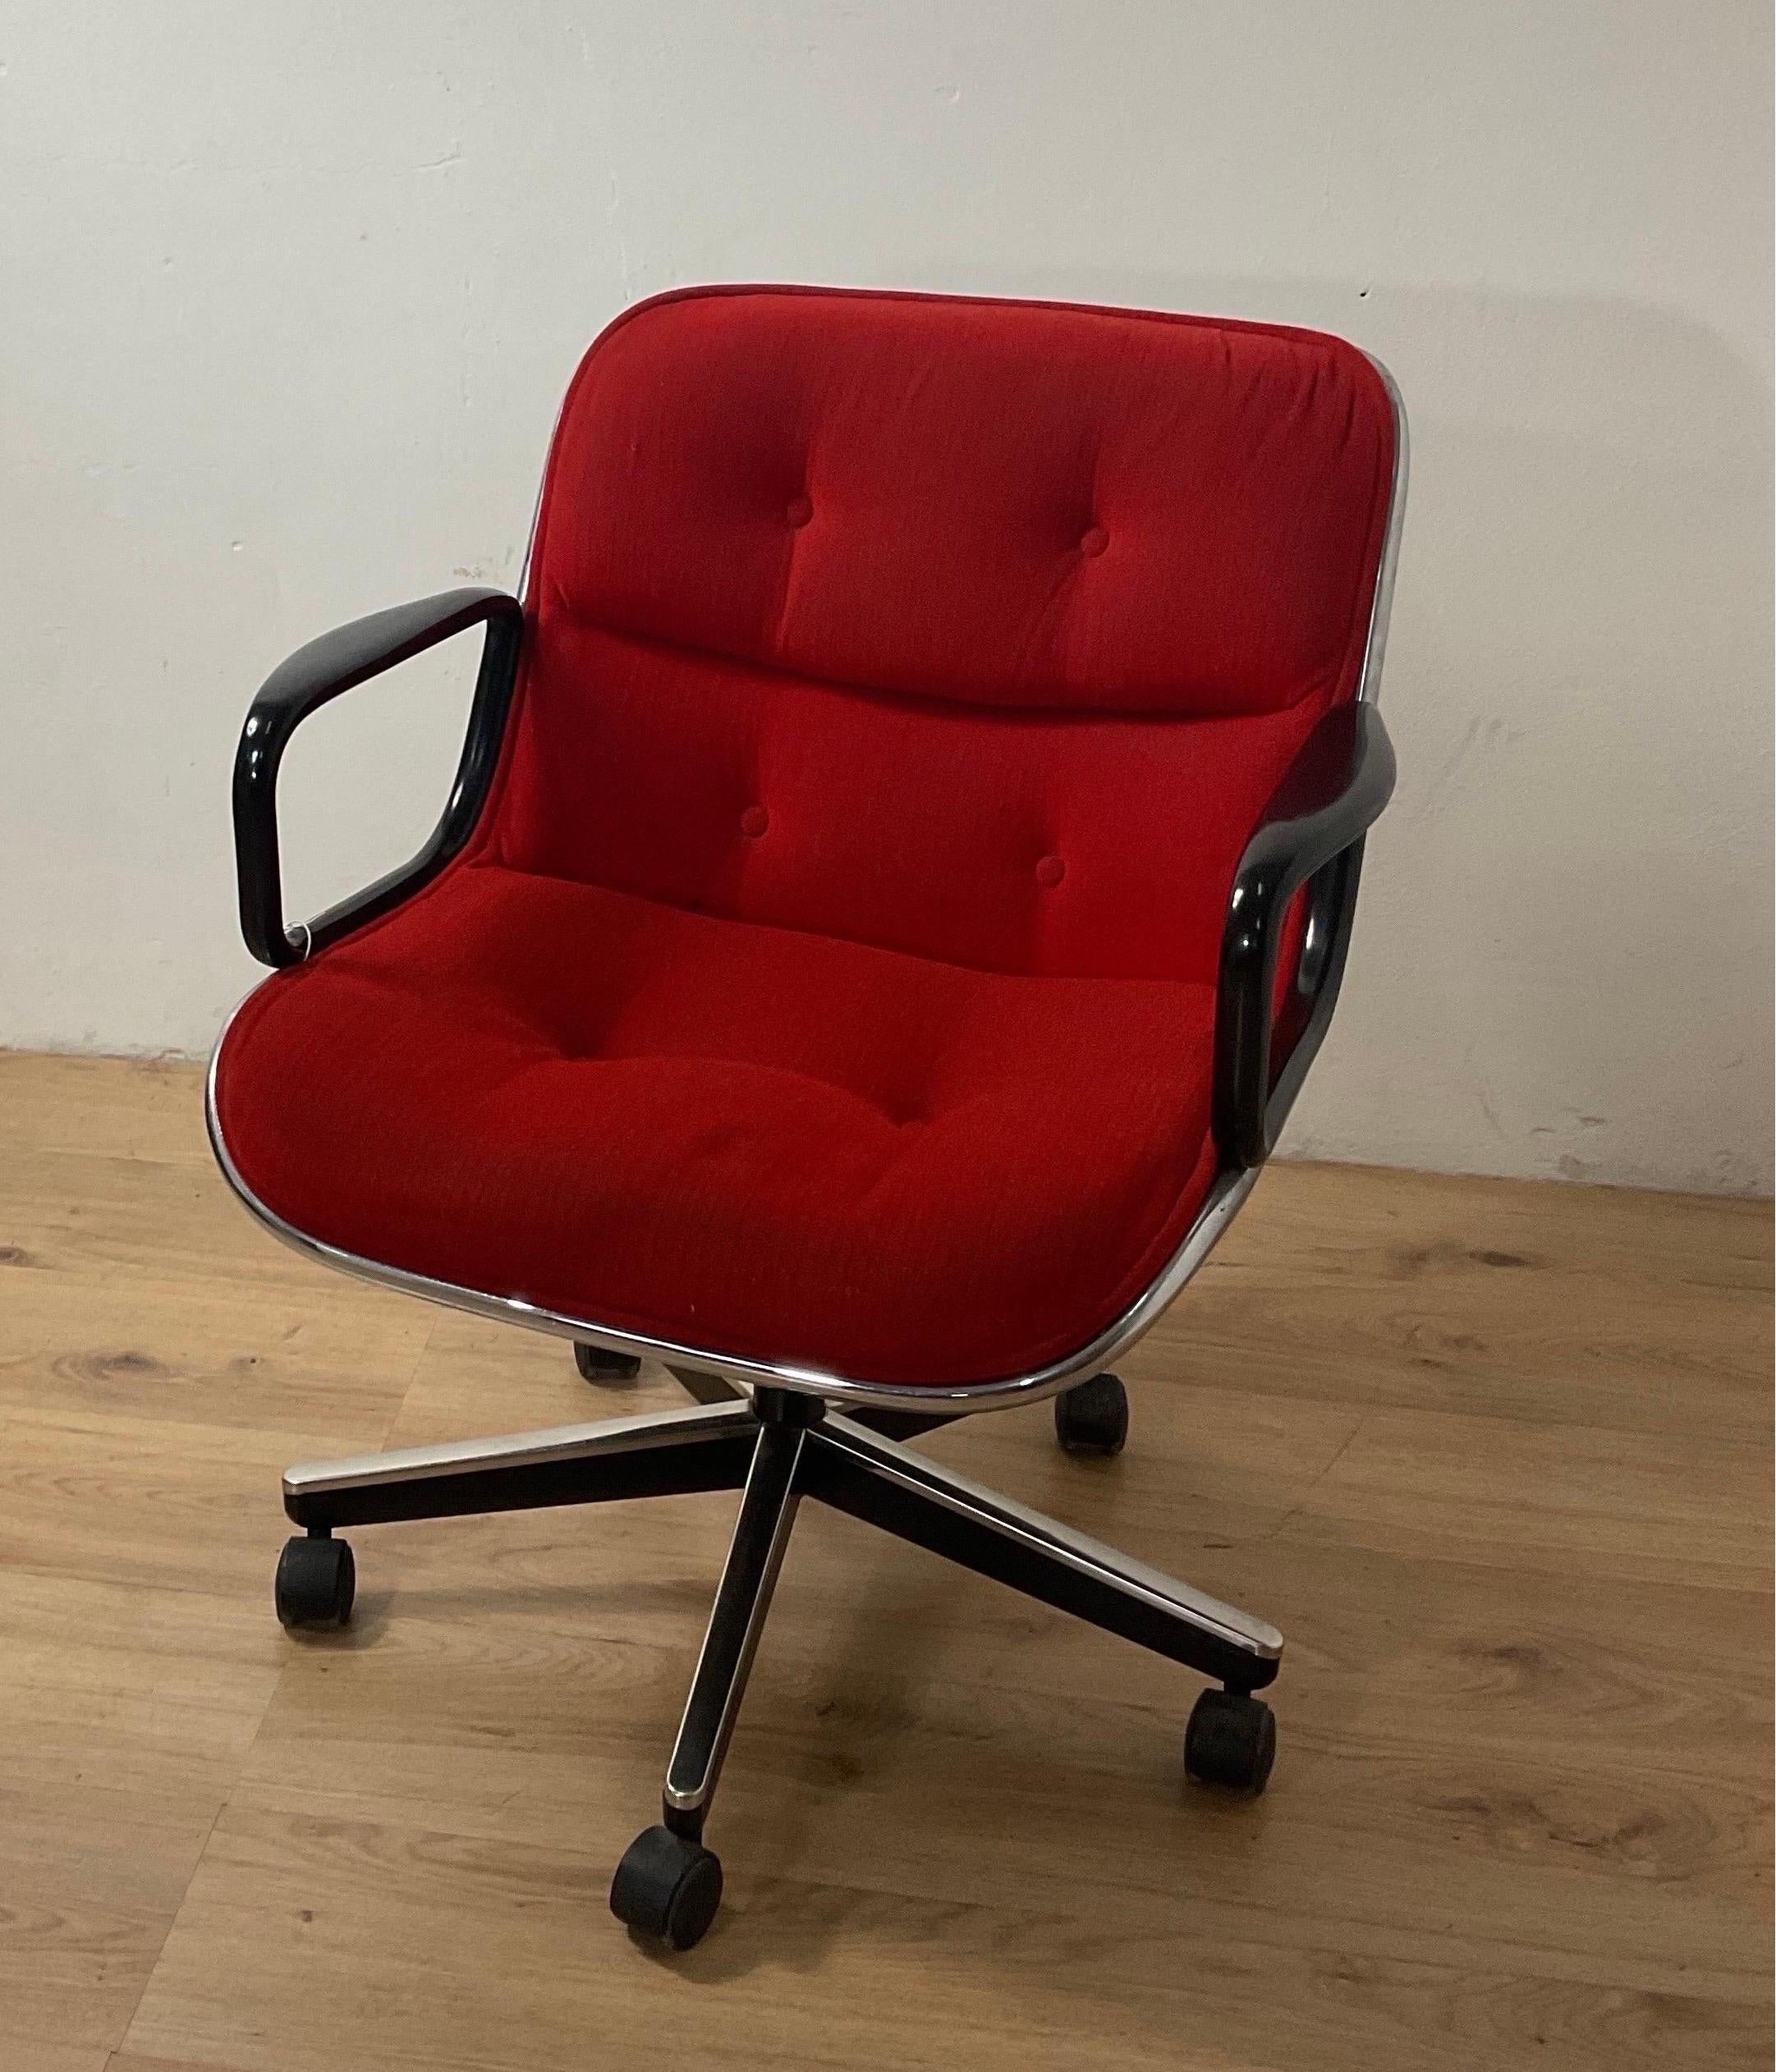 Mid-20th Century Charles Pollock Executive Chair for Knoll, 1963 For Sale